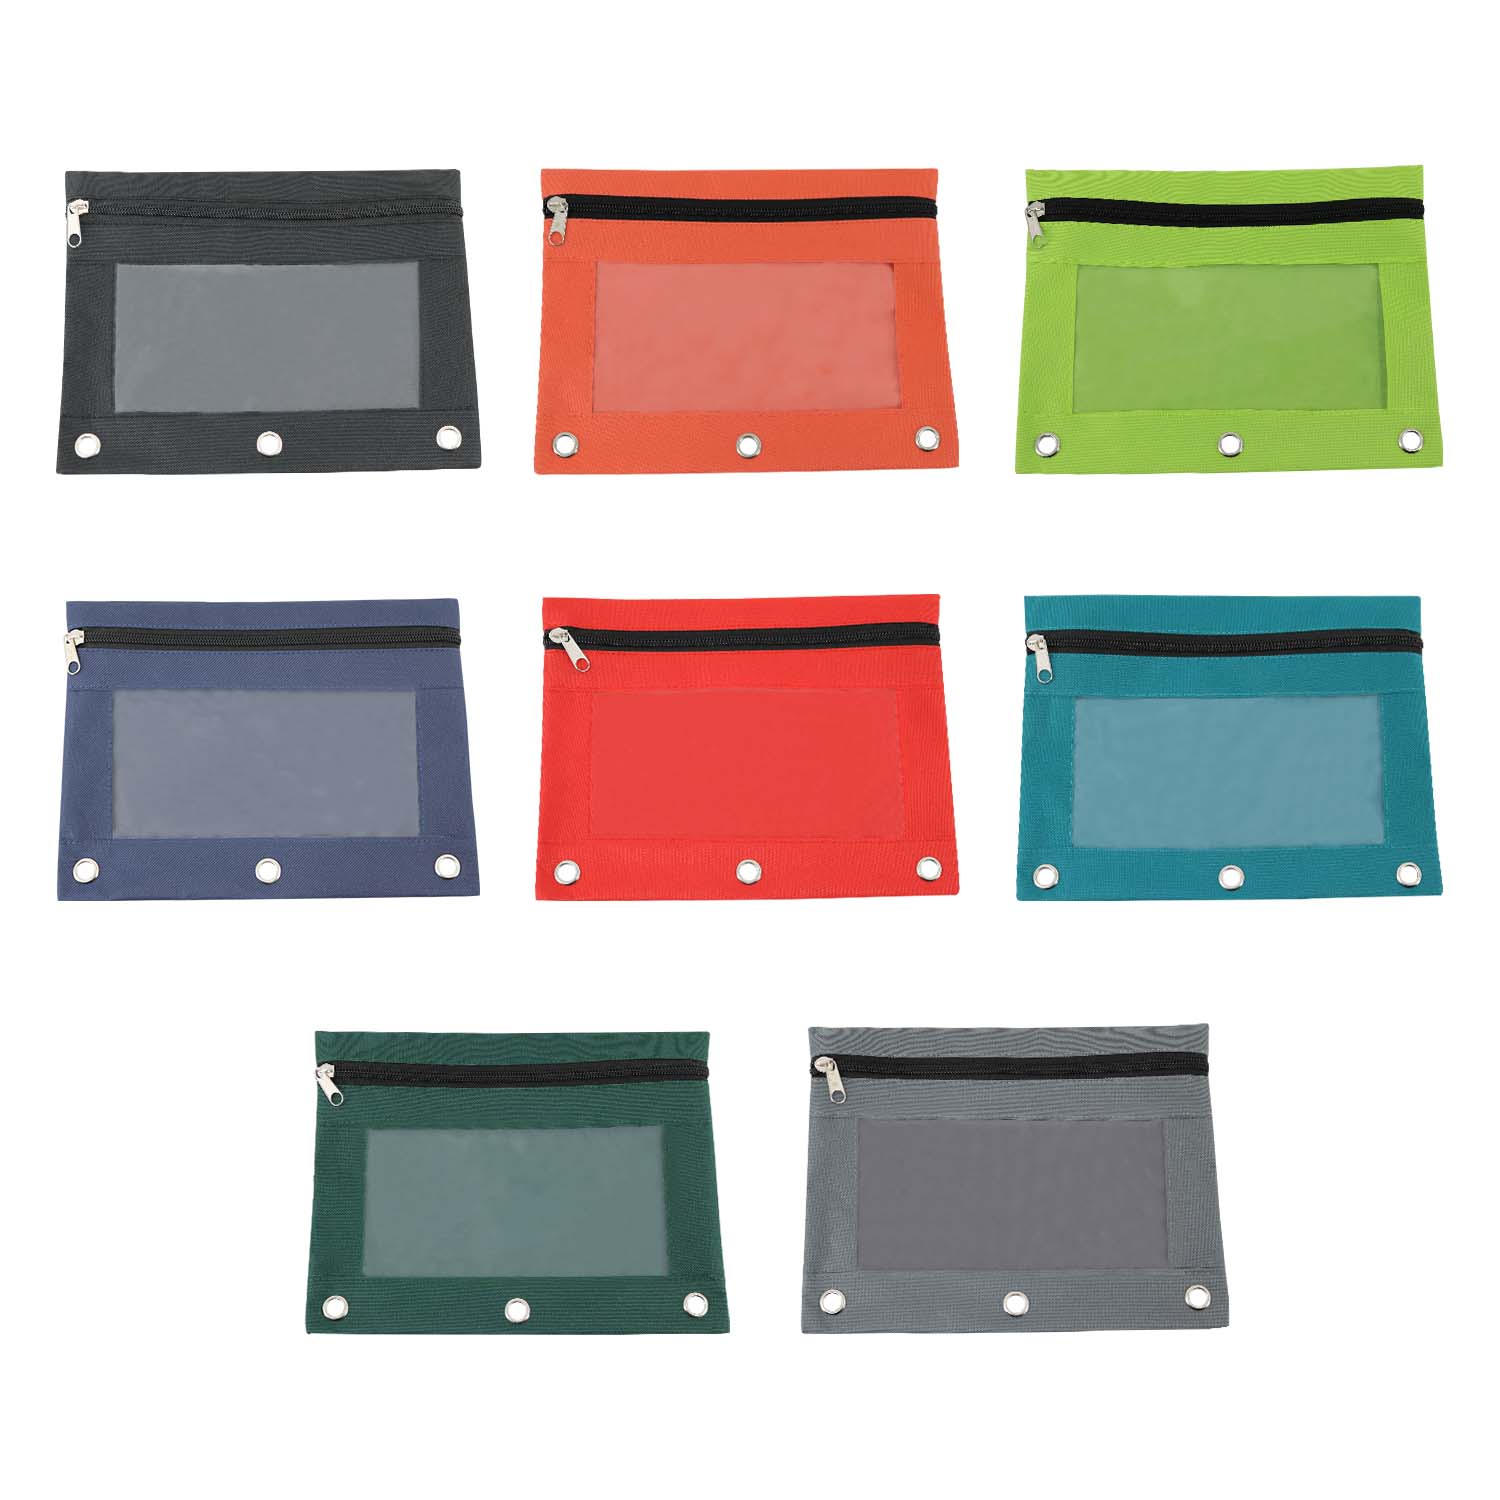 Wholesale 3 Ring Binder Clear Pencil Case - Assorted